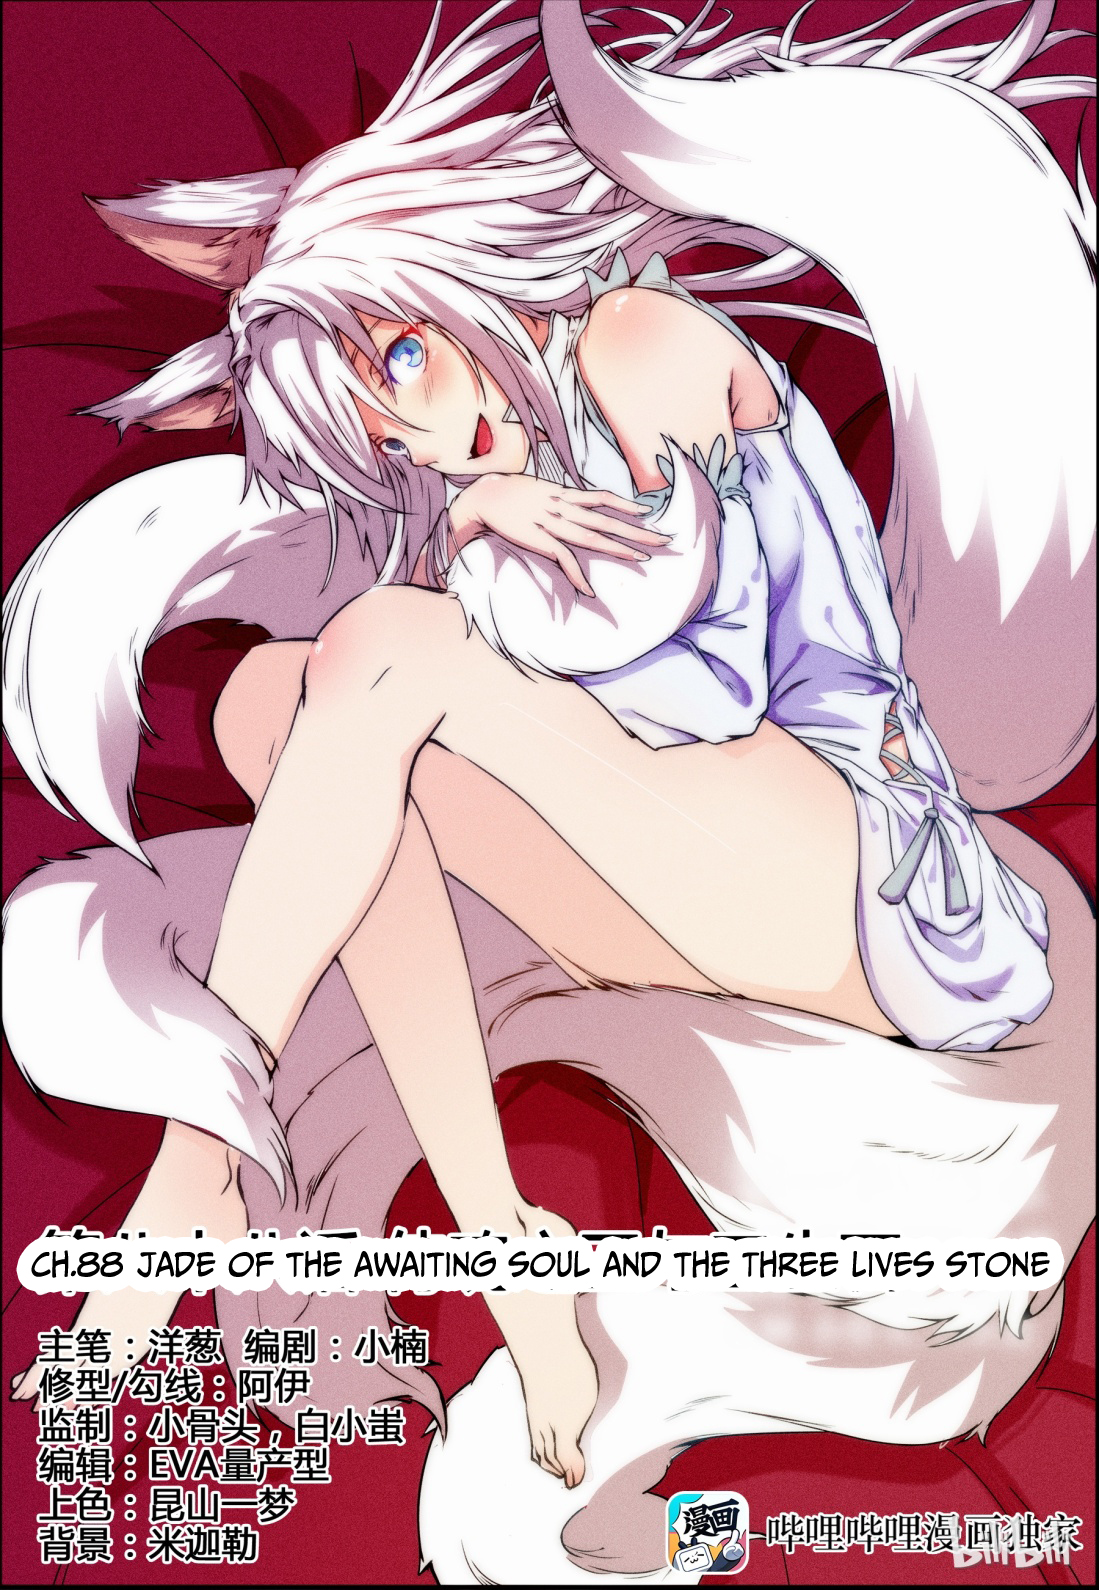 My Wife Is a Fox Spirit Ch. 88 Jade of the awaiting soul and the three lives stone